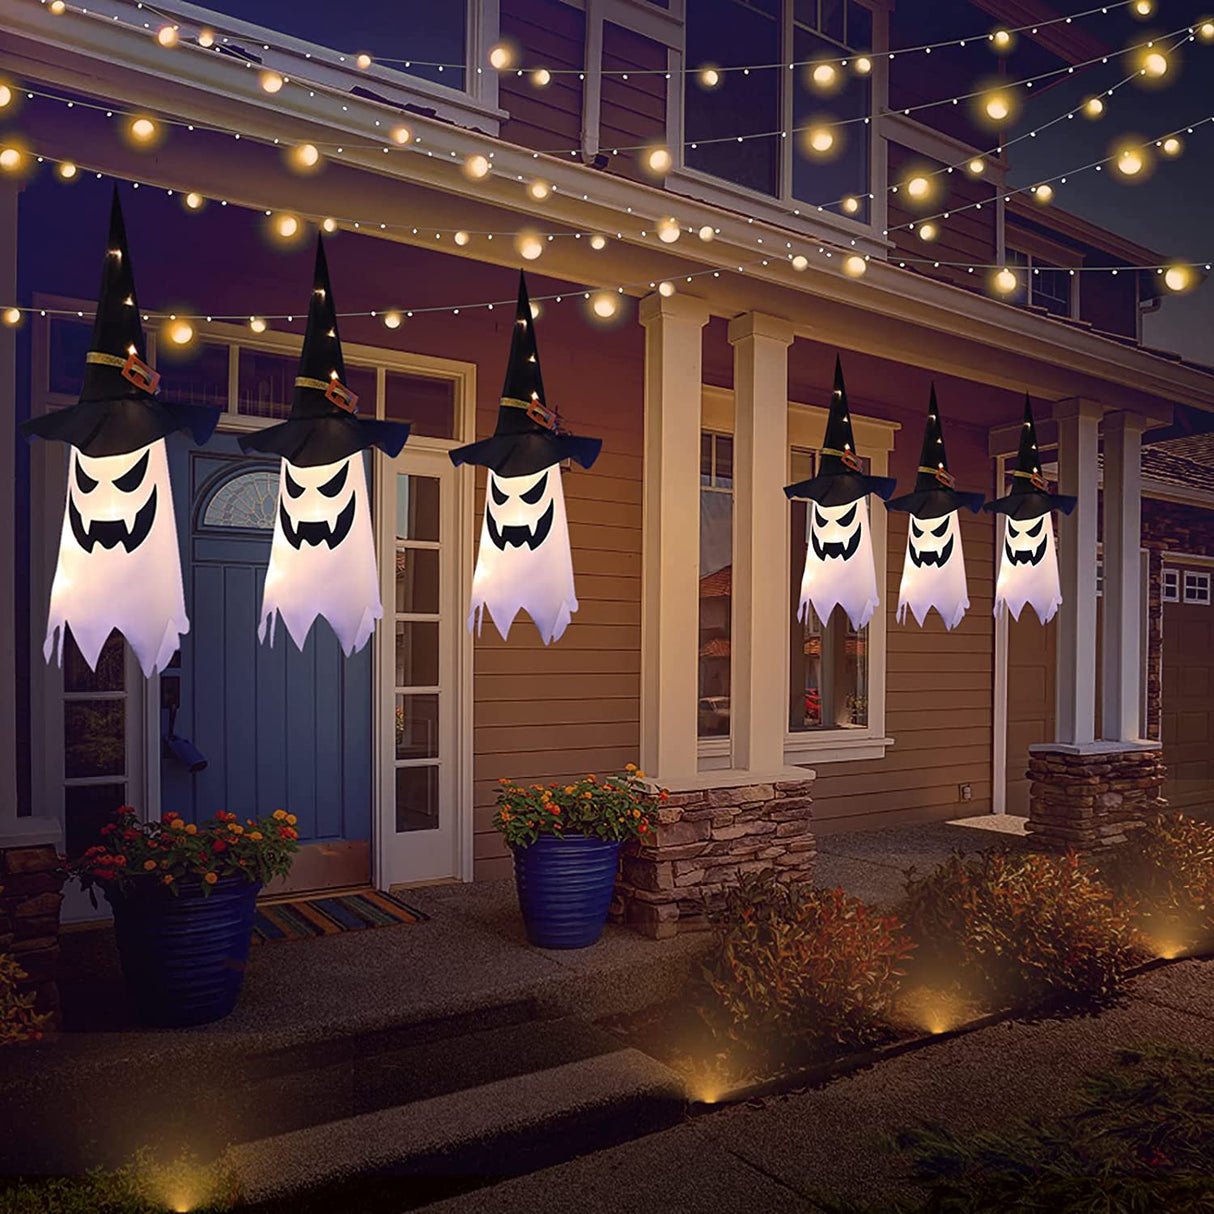 Halloween Decorations Outdoor Decor Hanging Lighted Glowing Ghost Witch Hat Halloween Decorations Indoor outside Ornaments Clearance Halloween Party Lights String for Yard Tree Garden(3Pcs)